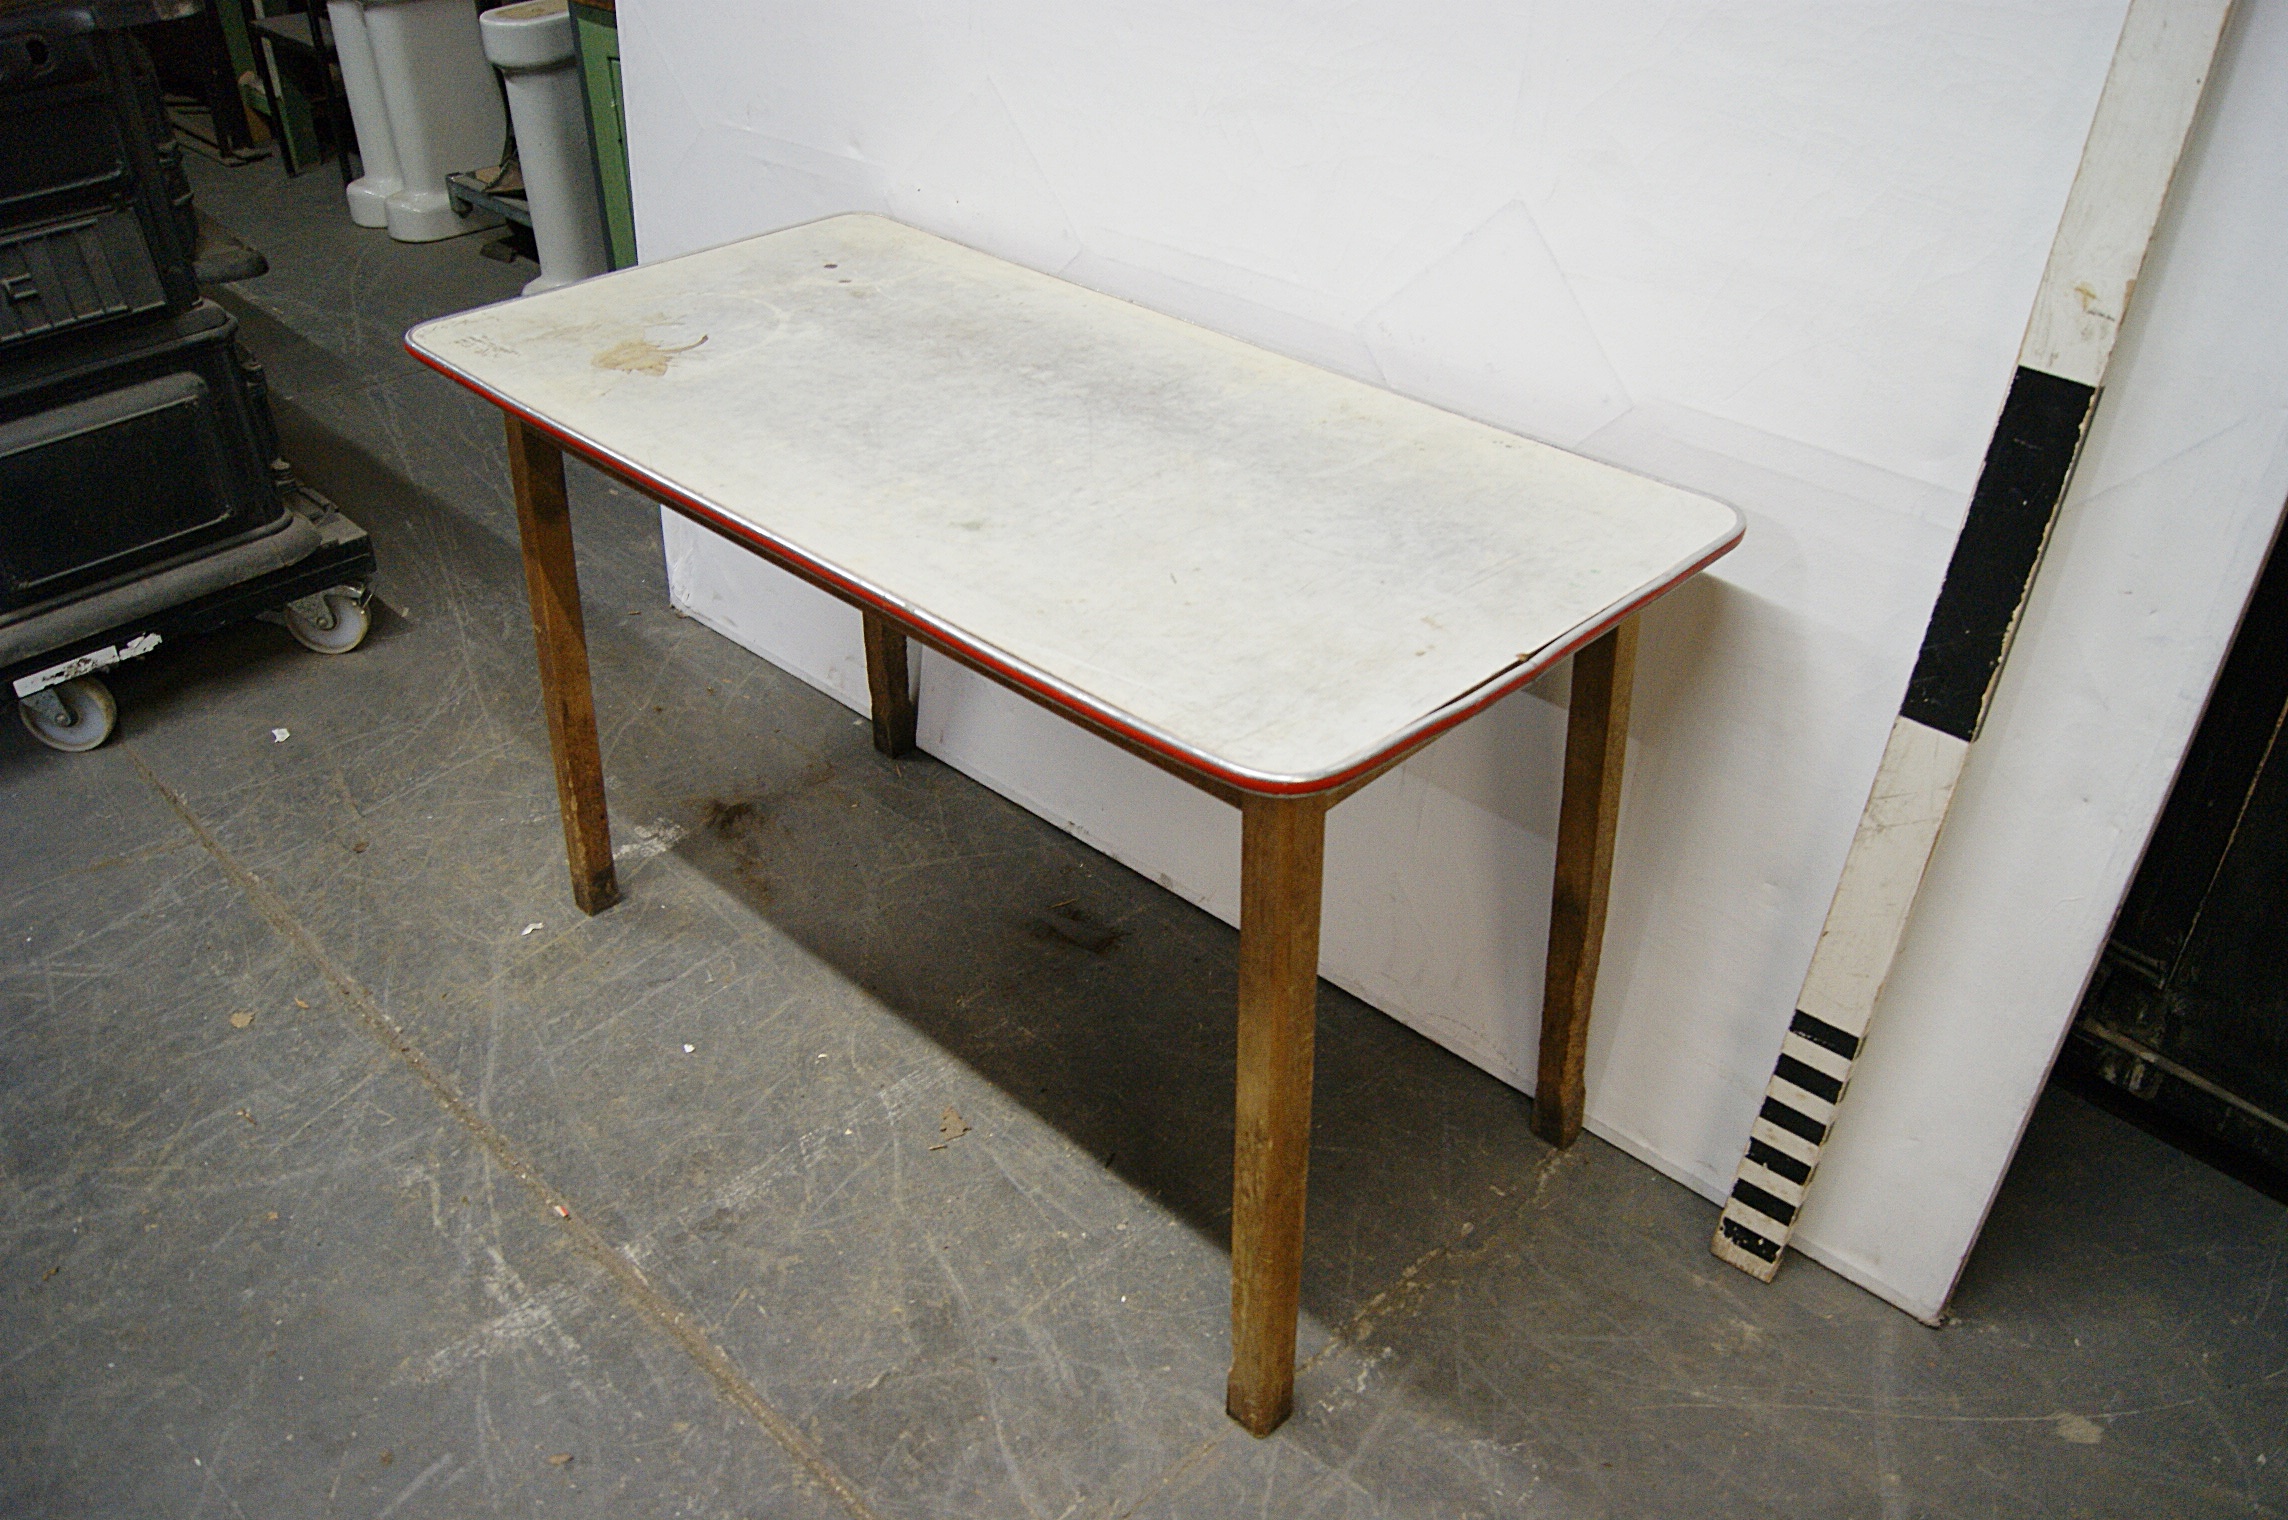 formica topped kitchen table